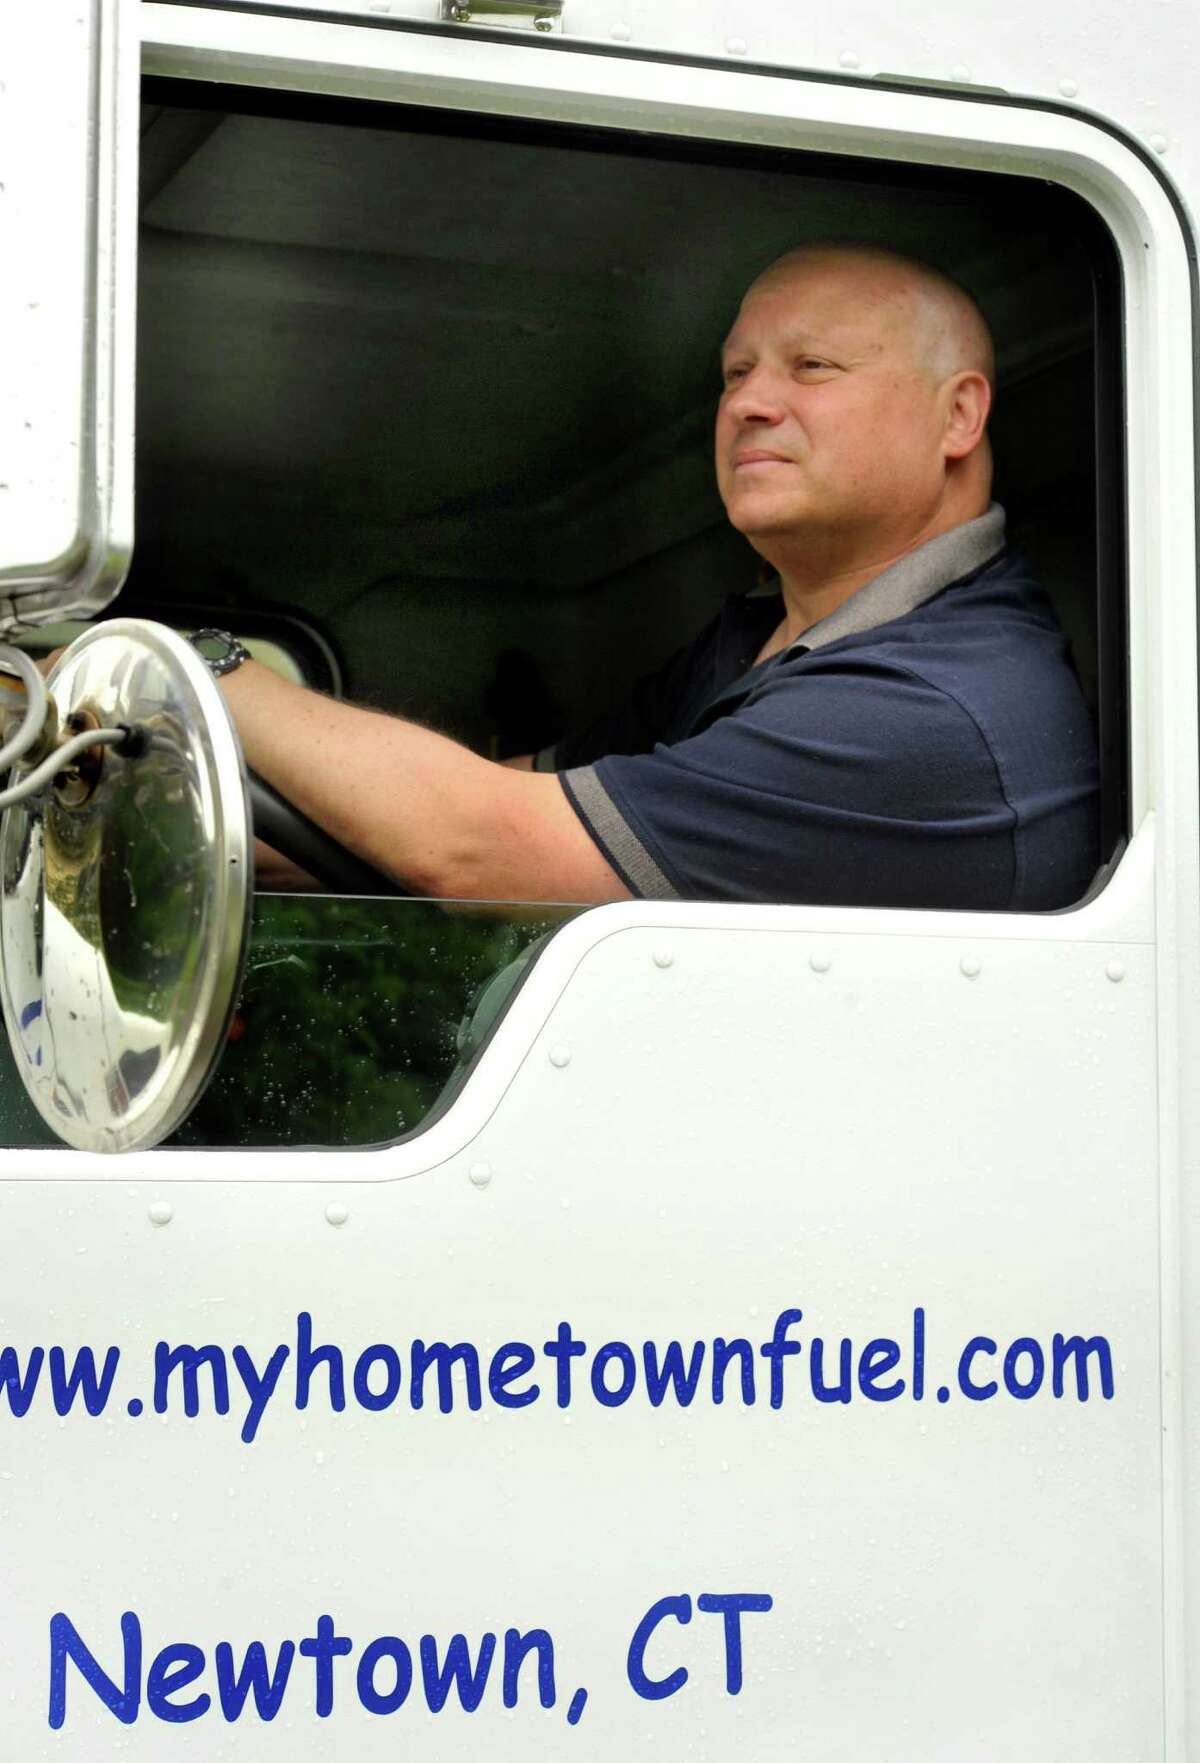 Rich Paltauf owns Hometown Fuel in Newtown. Photographed Thursday, May 24, 2012.